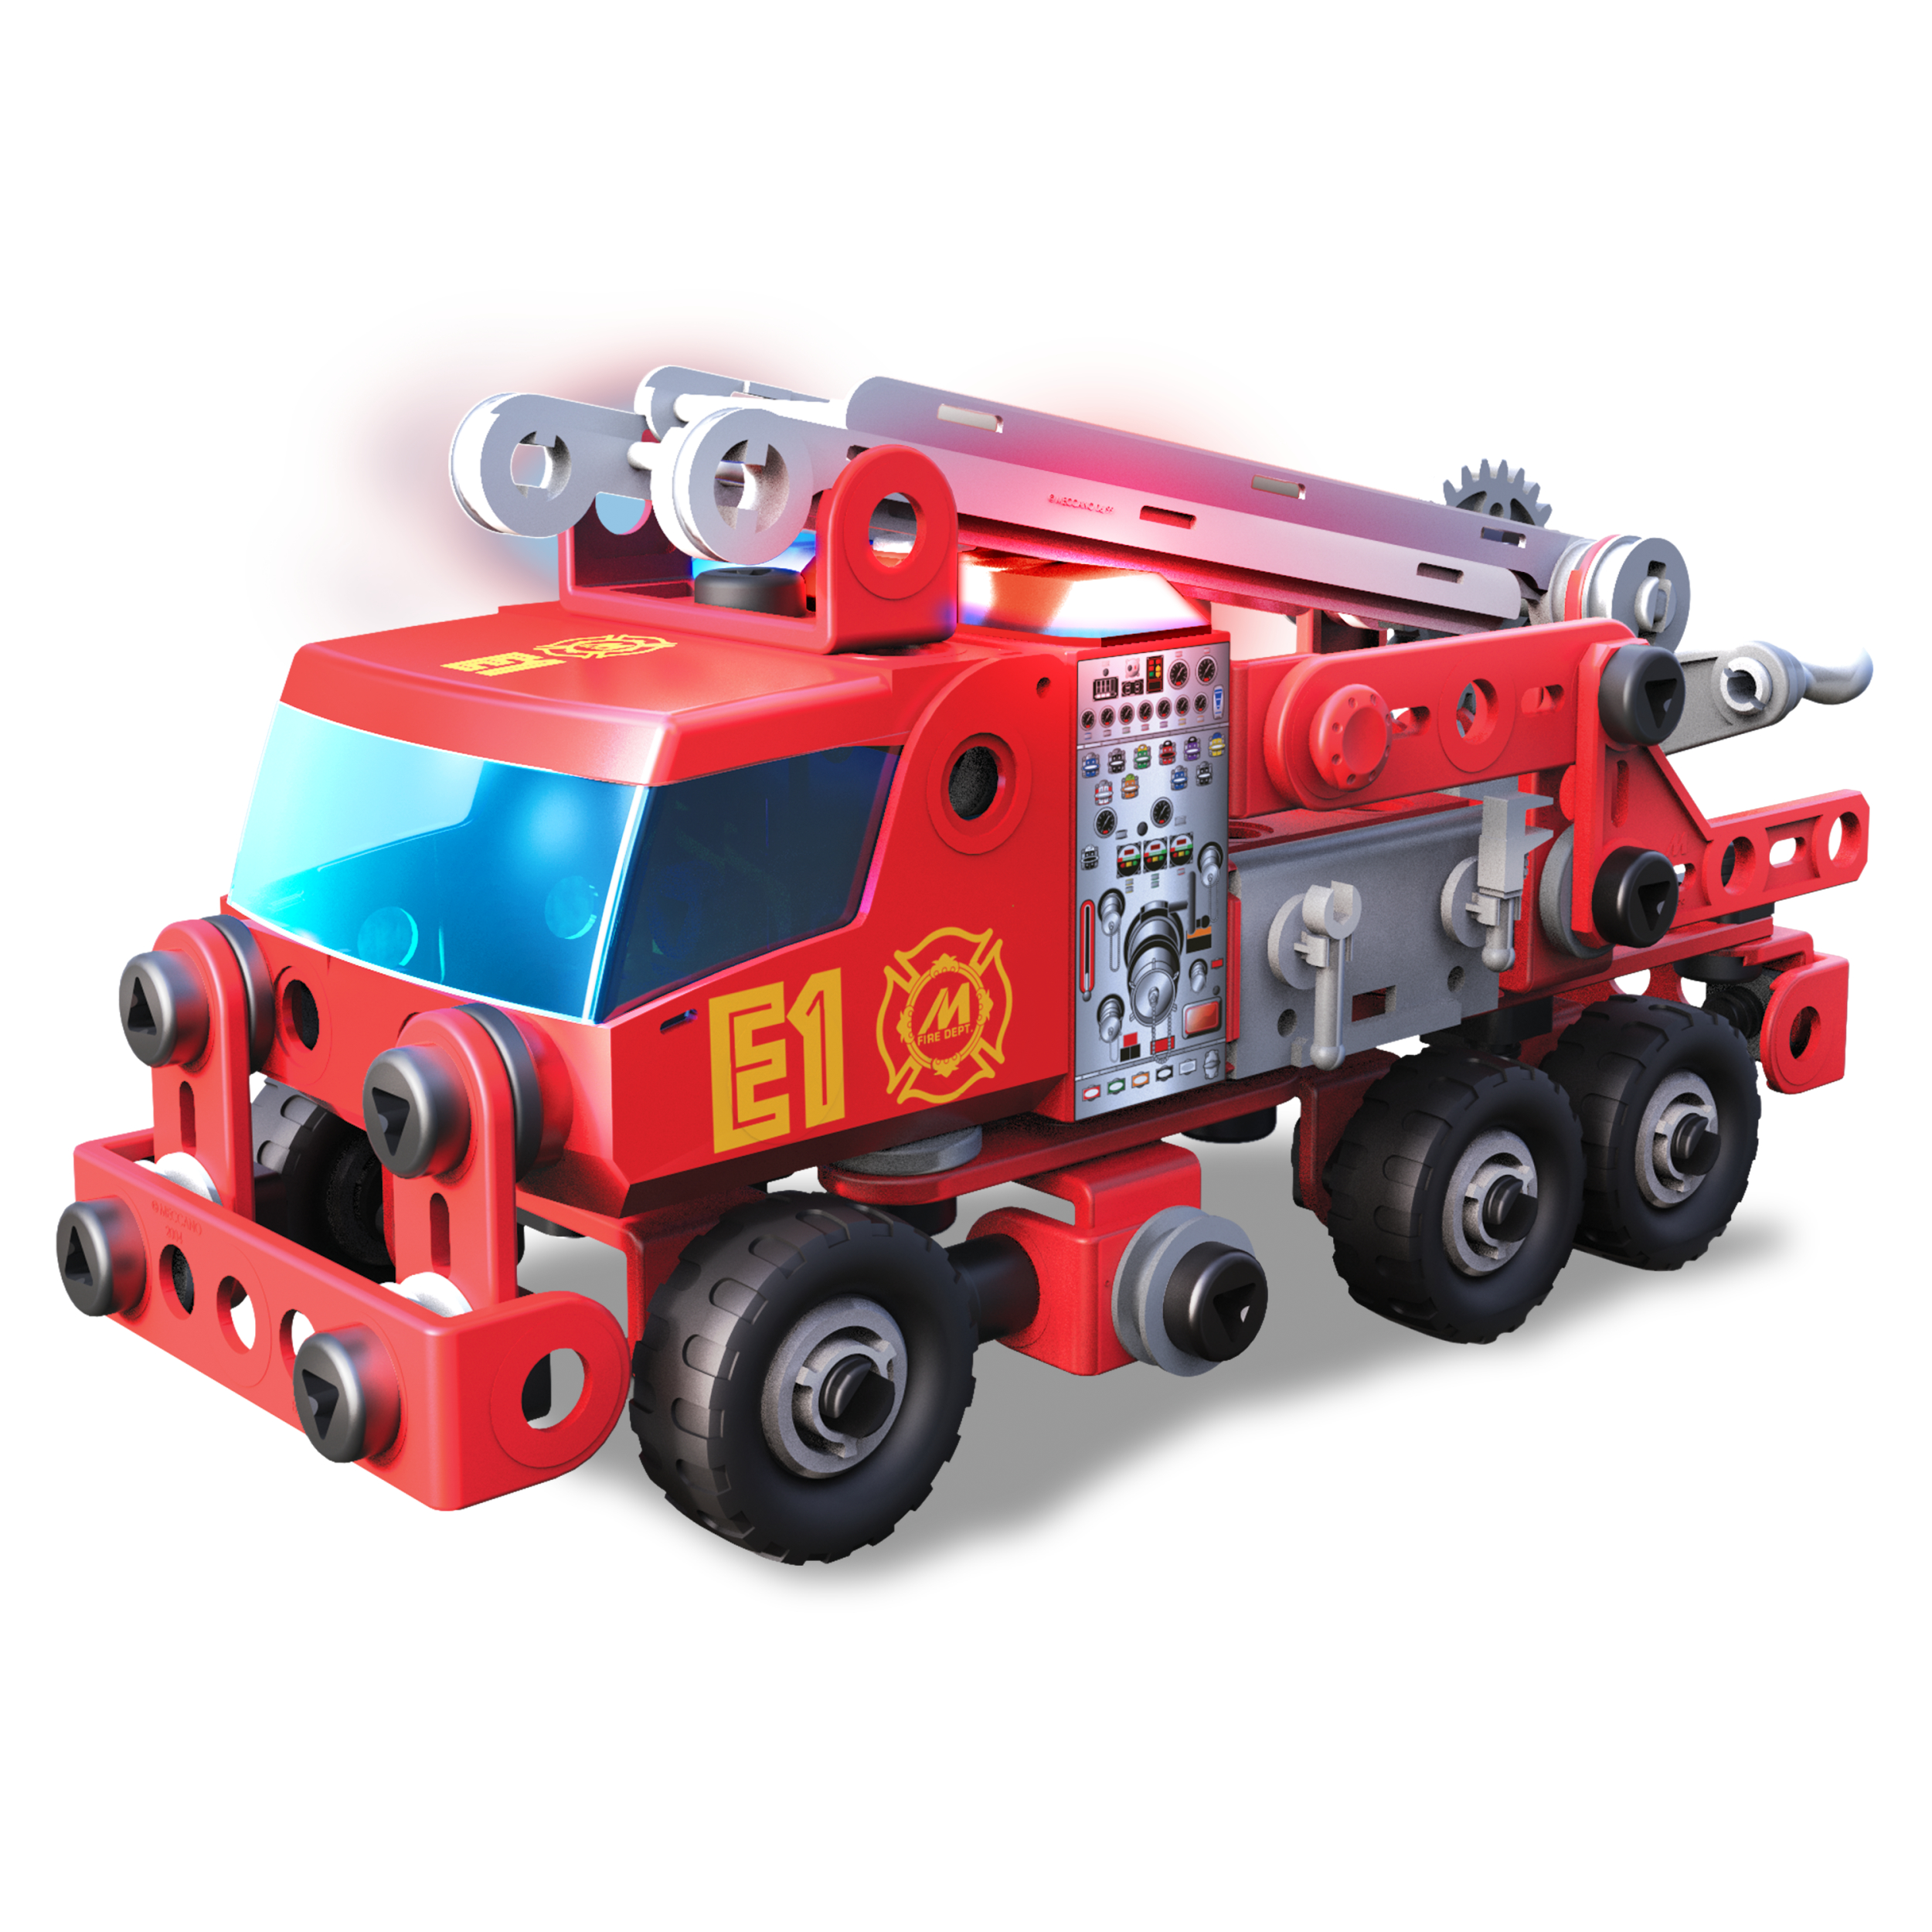 Meccano Junior Rescue Fire Truck with Lights and Sounds Model Building Kit - image 3 of 8